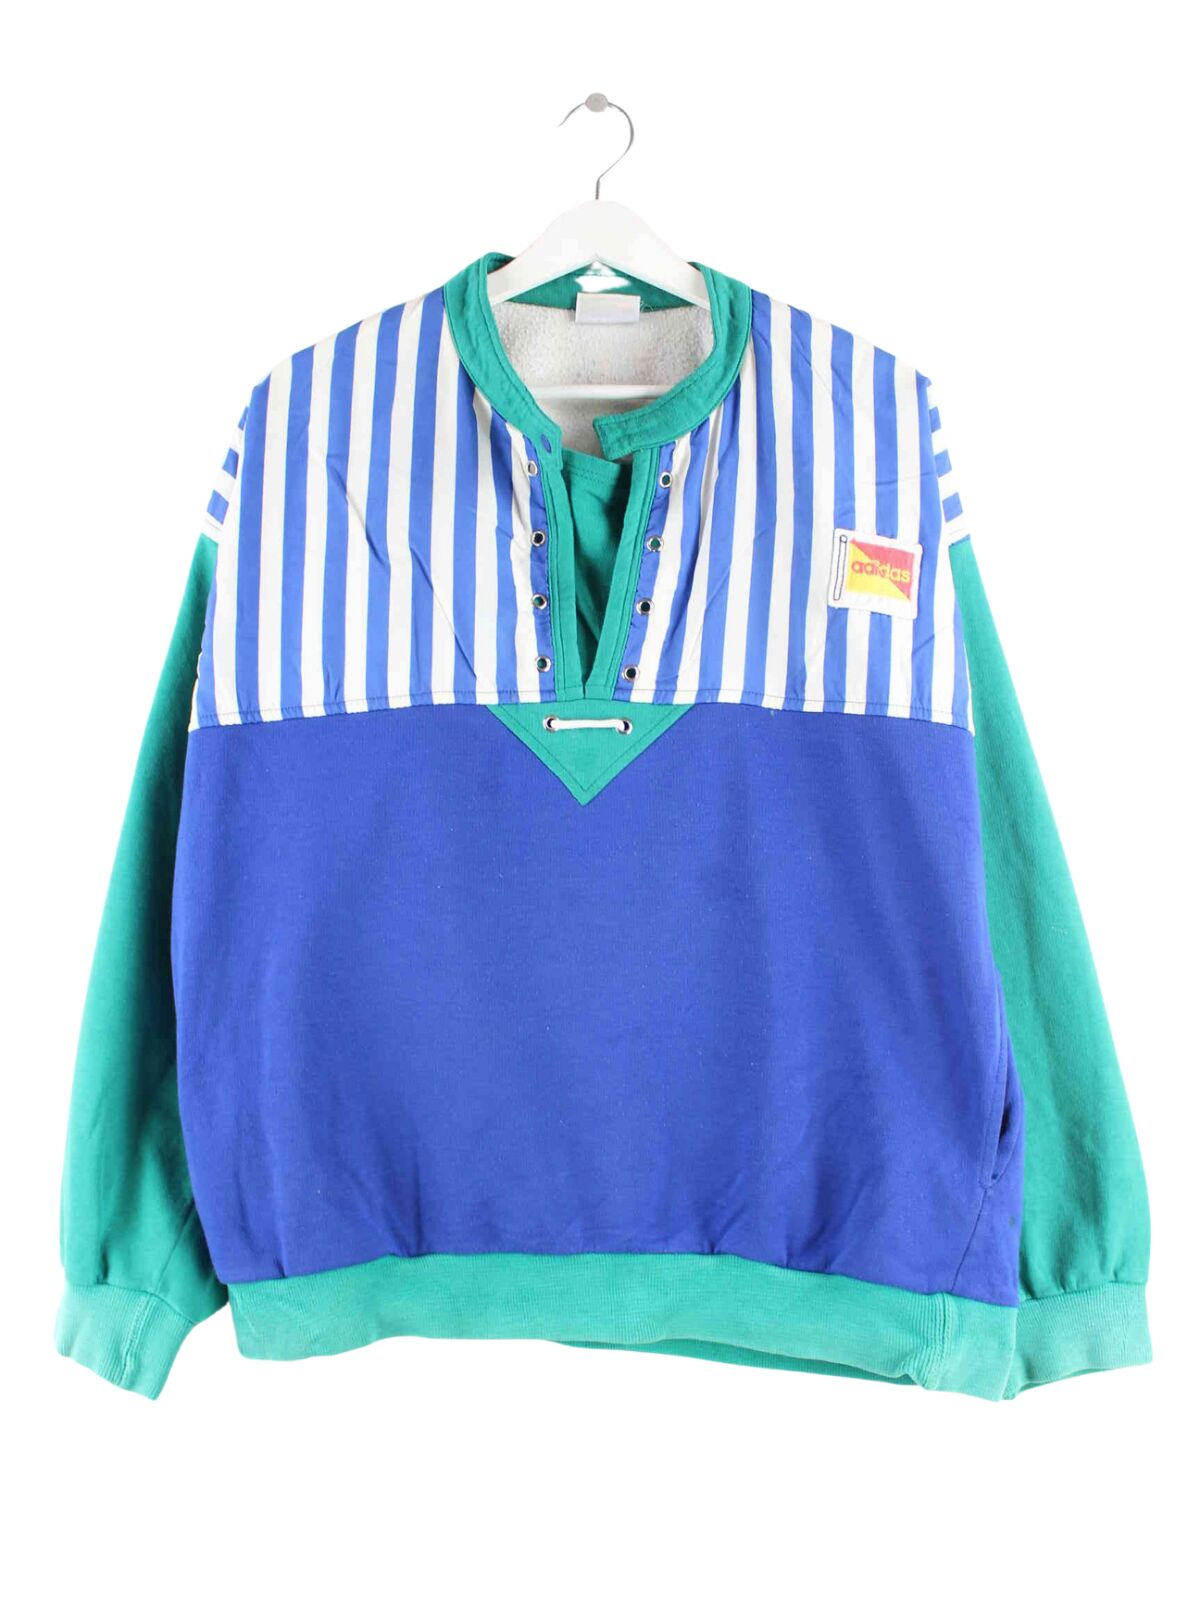 Adidas 70s Vintage Embroidered Sweater Blau L (front image)